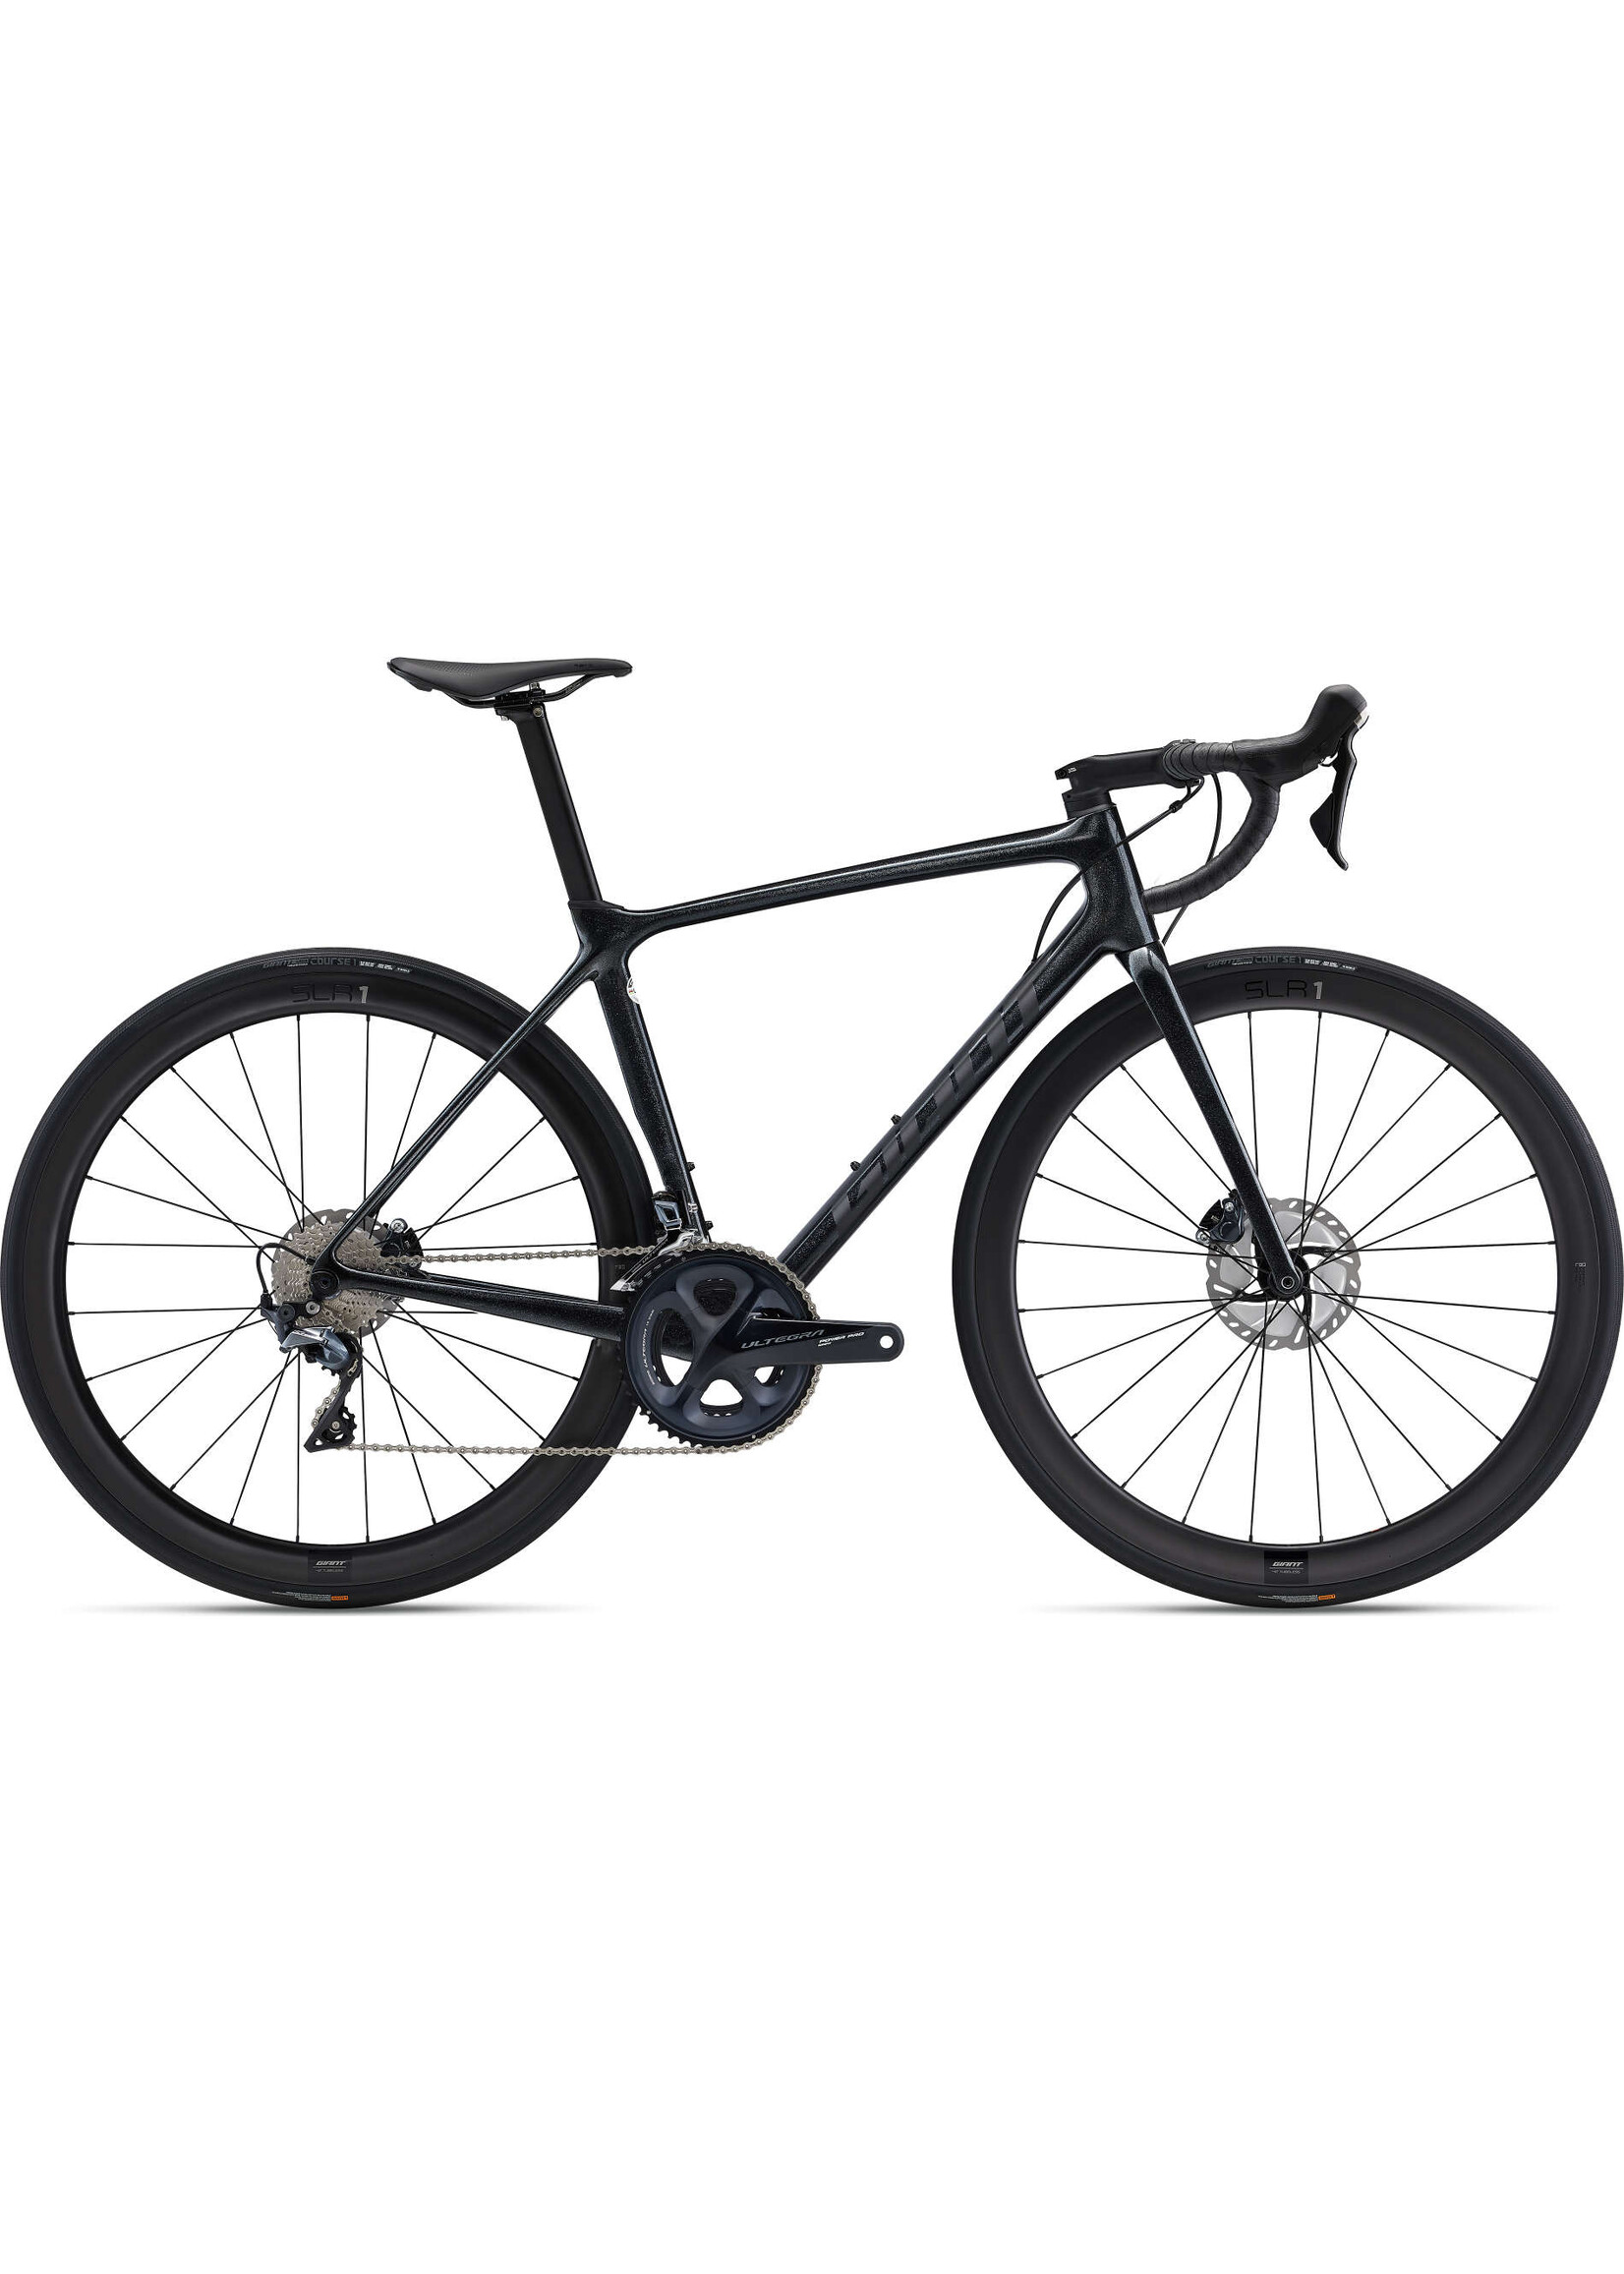 Giant Giant TCR Advanced Pro 1 Disc Small